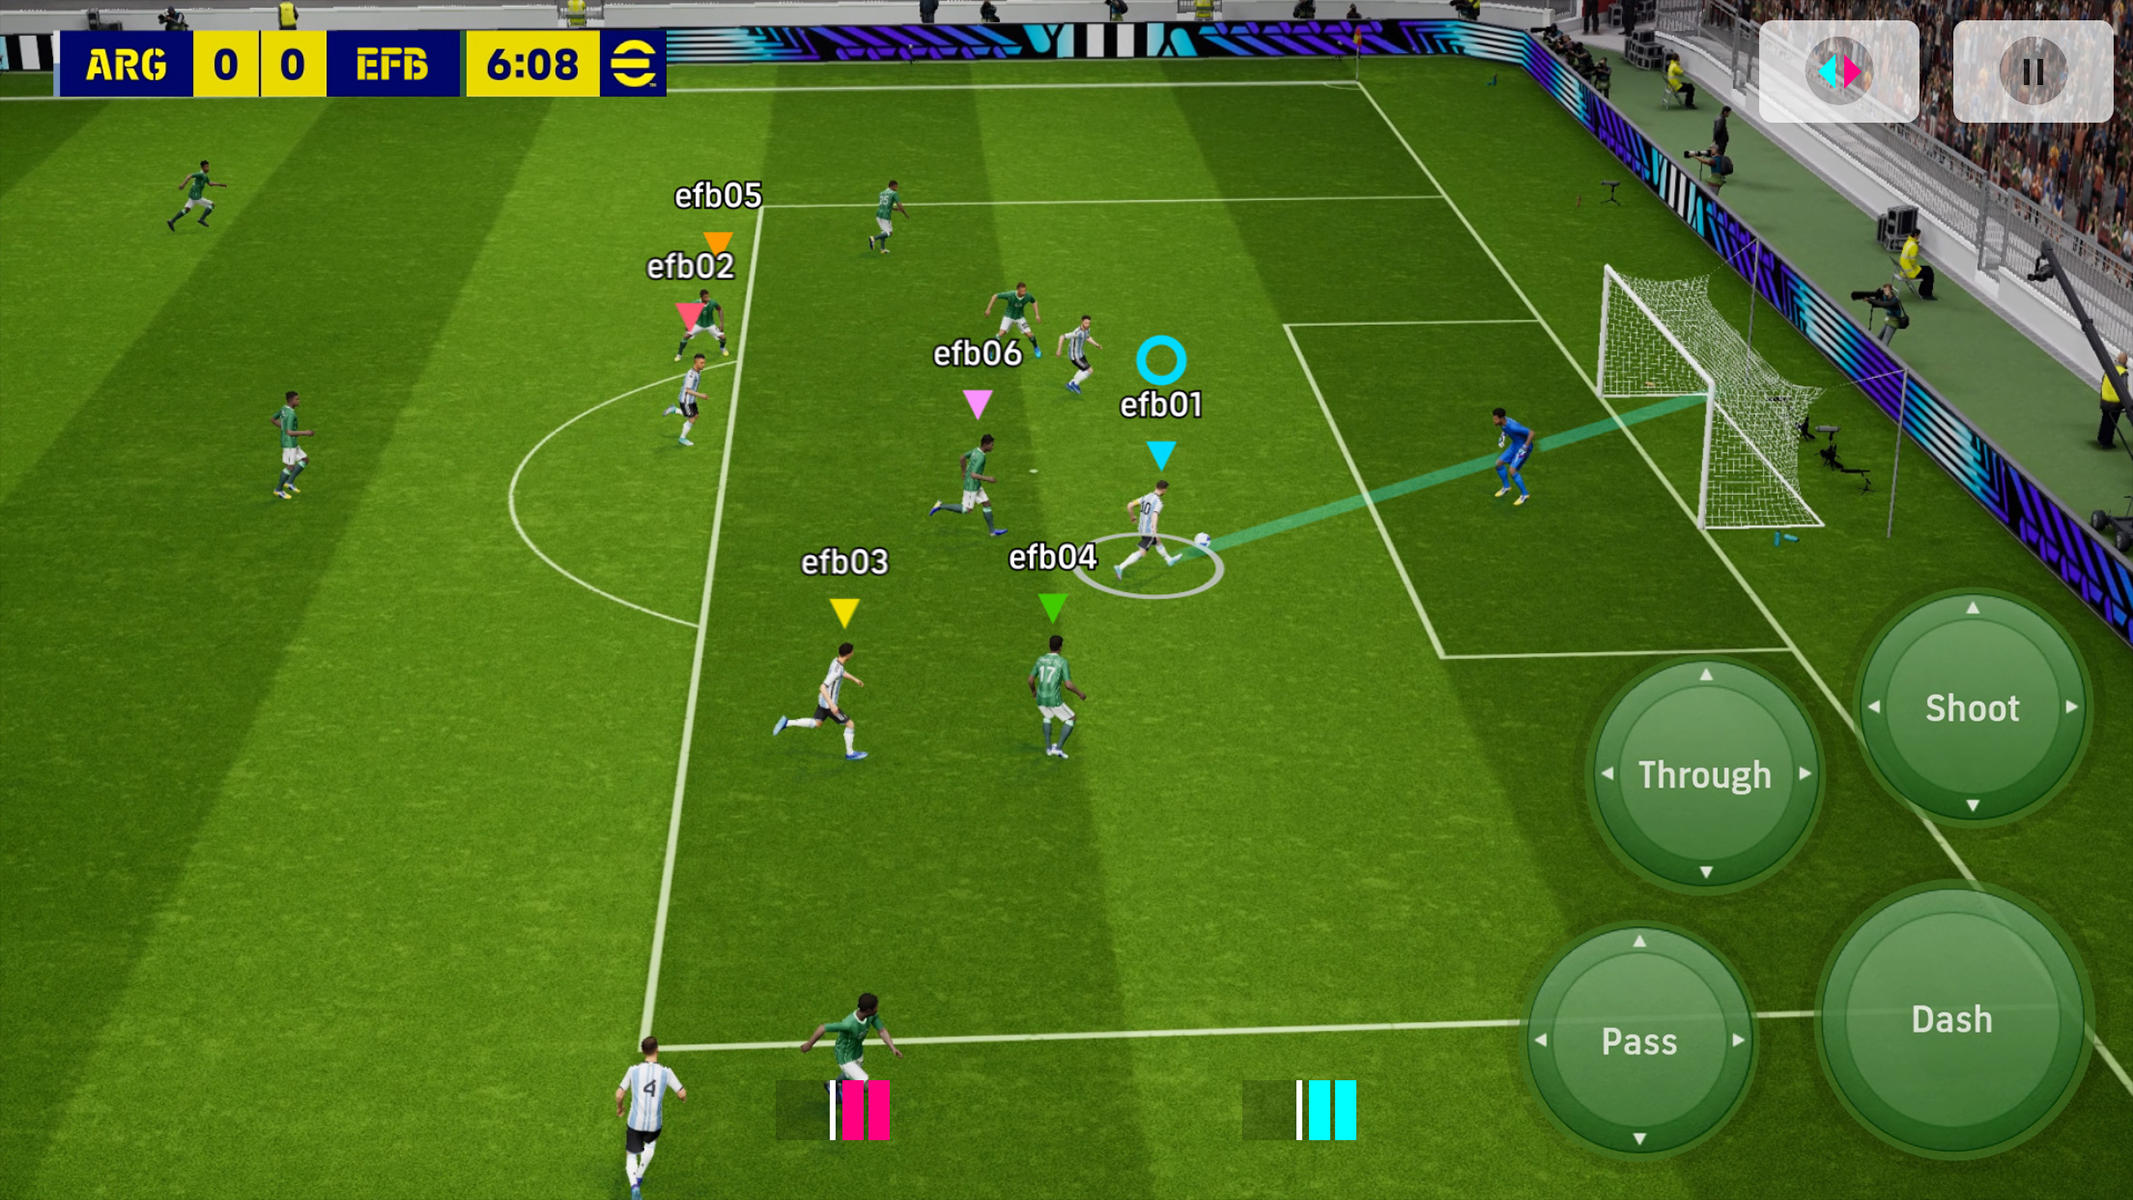 How to download pes 2012 apk , working 100% full version for Android 